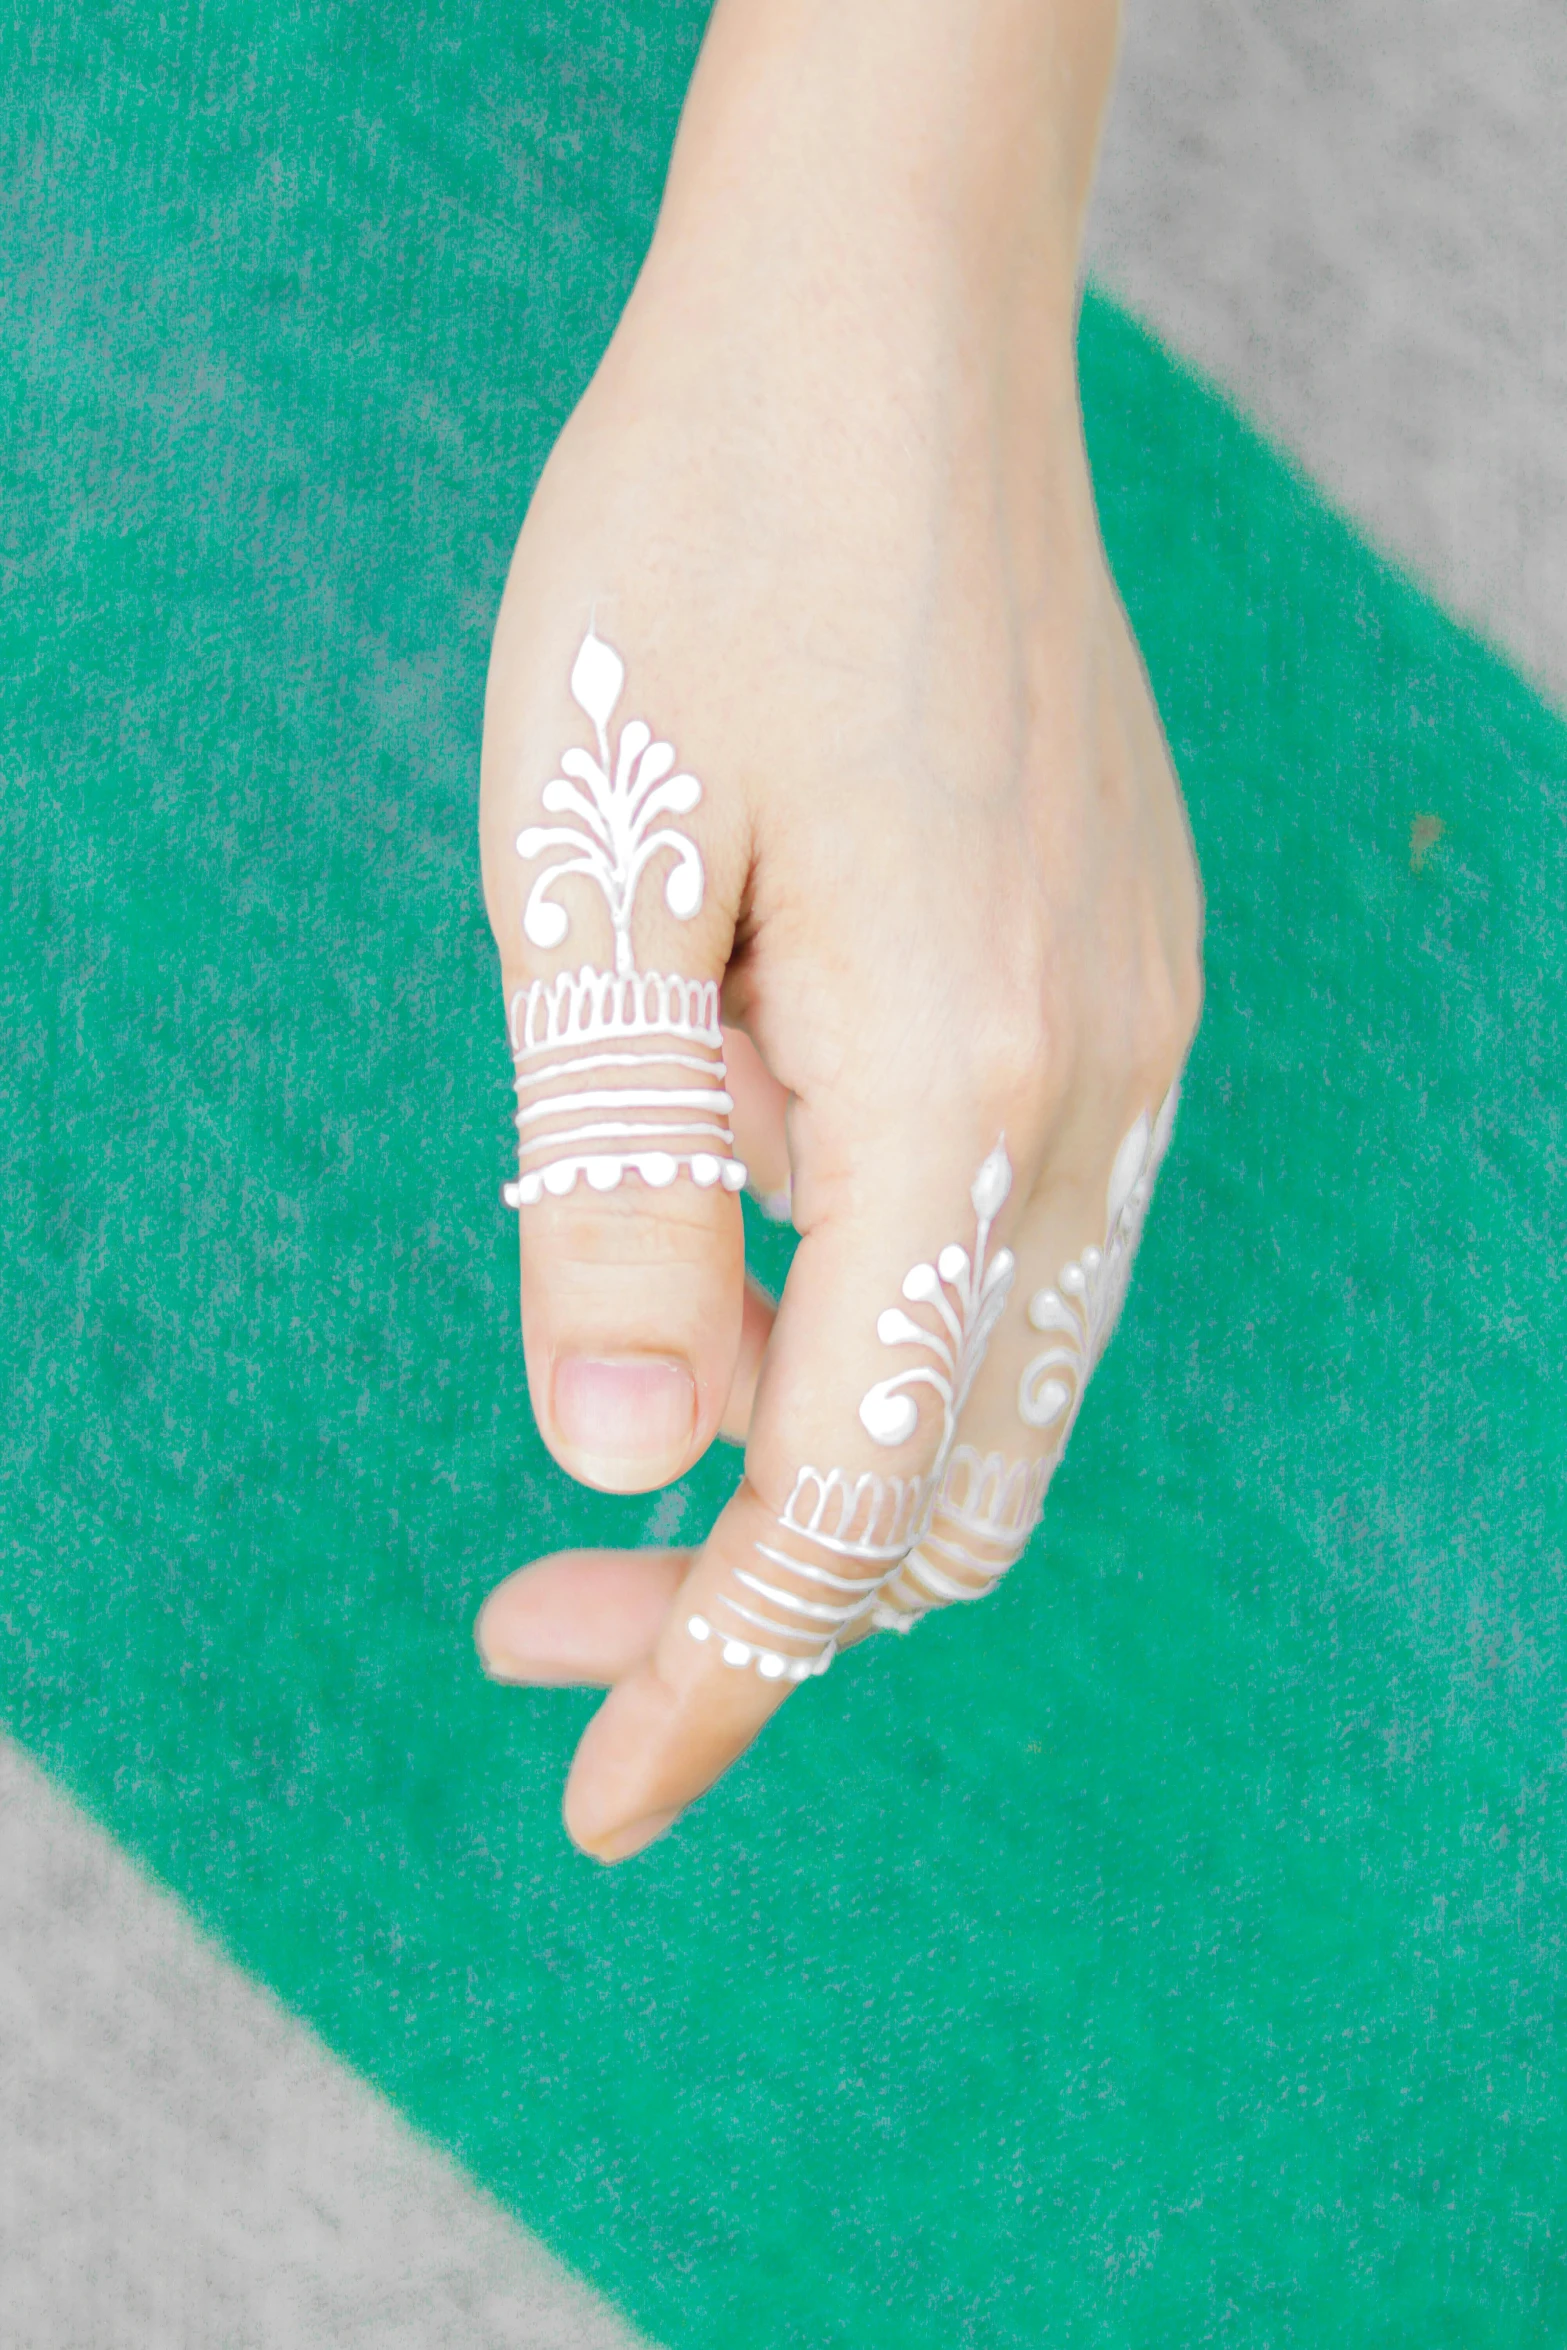 henna tattoos are the latest popular design trend for brides